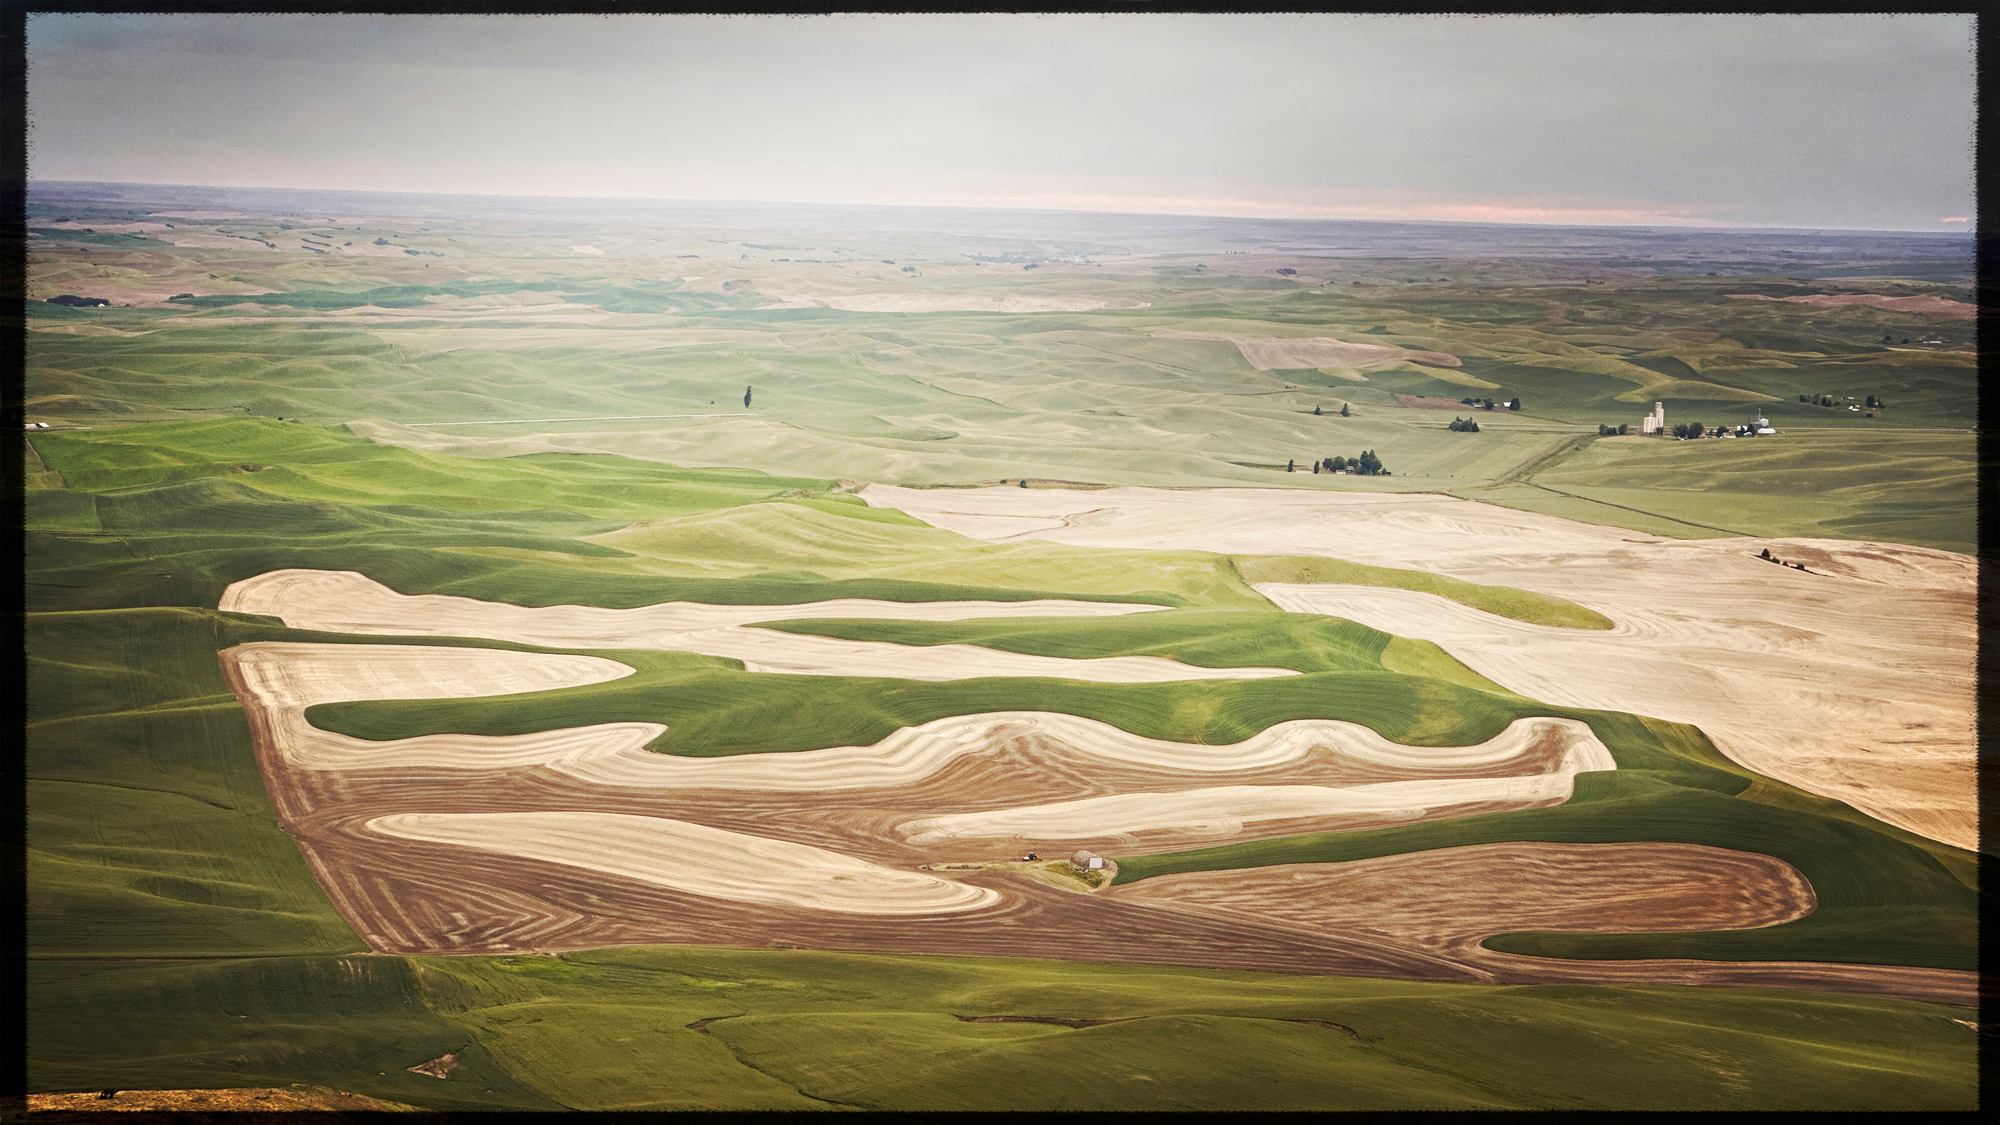 An image from the top of Steptoe Butte